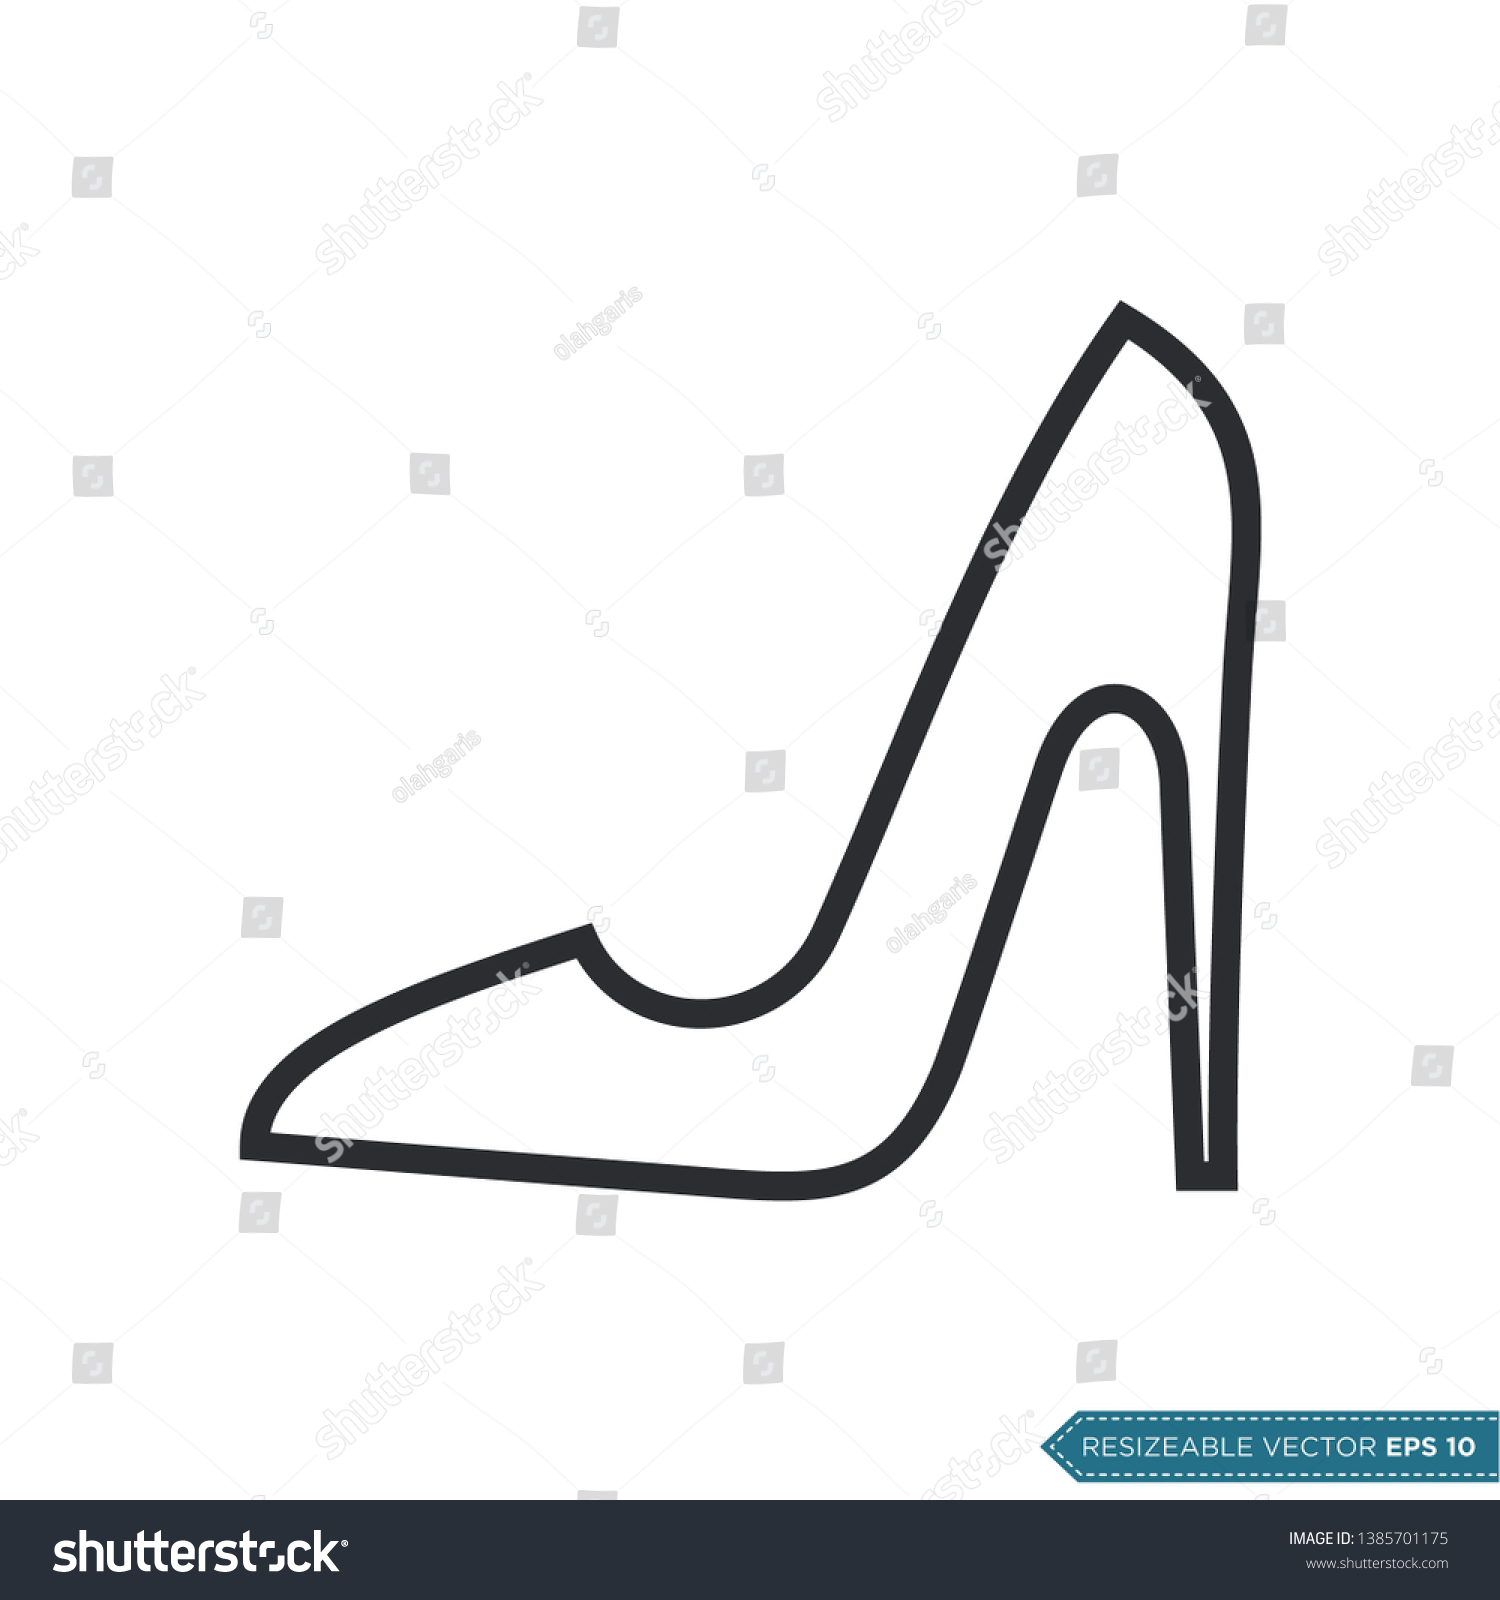 High Heels Women Shoe Icon Vector Stock Vector (Royalty Free Throughout High Heel Template For Cards